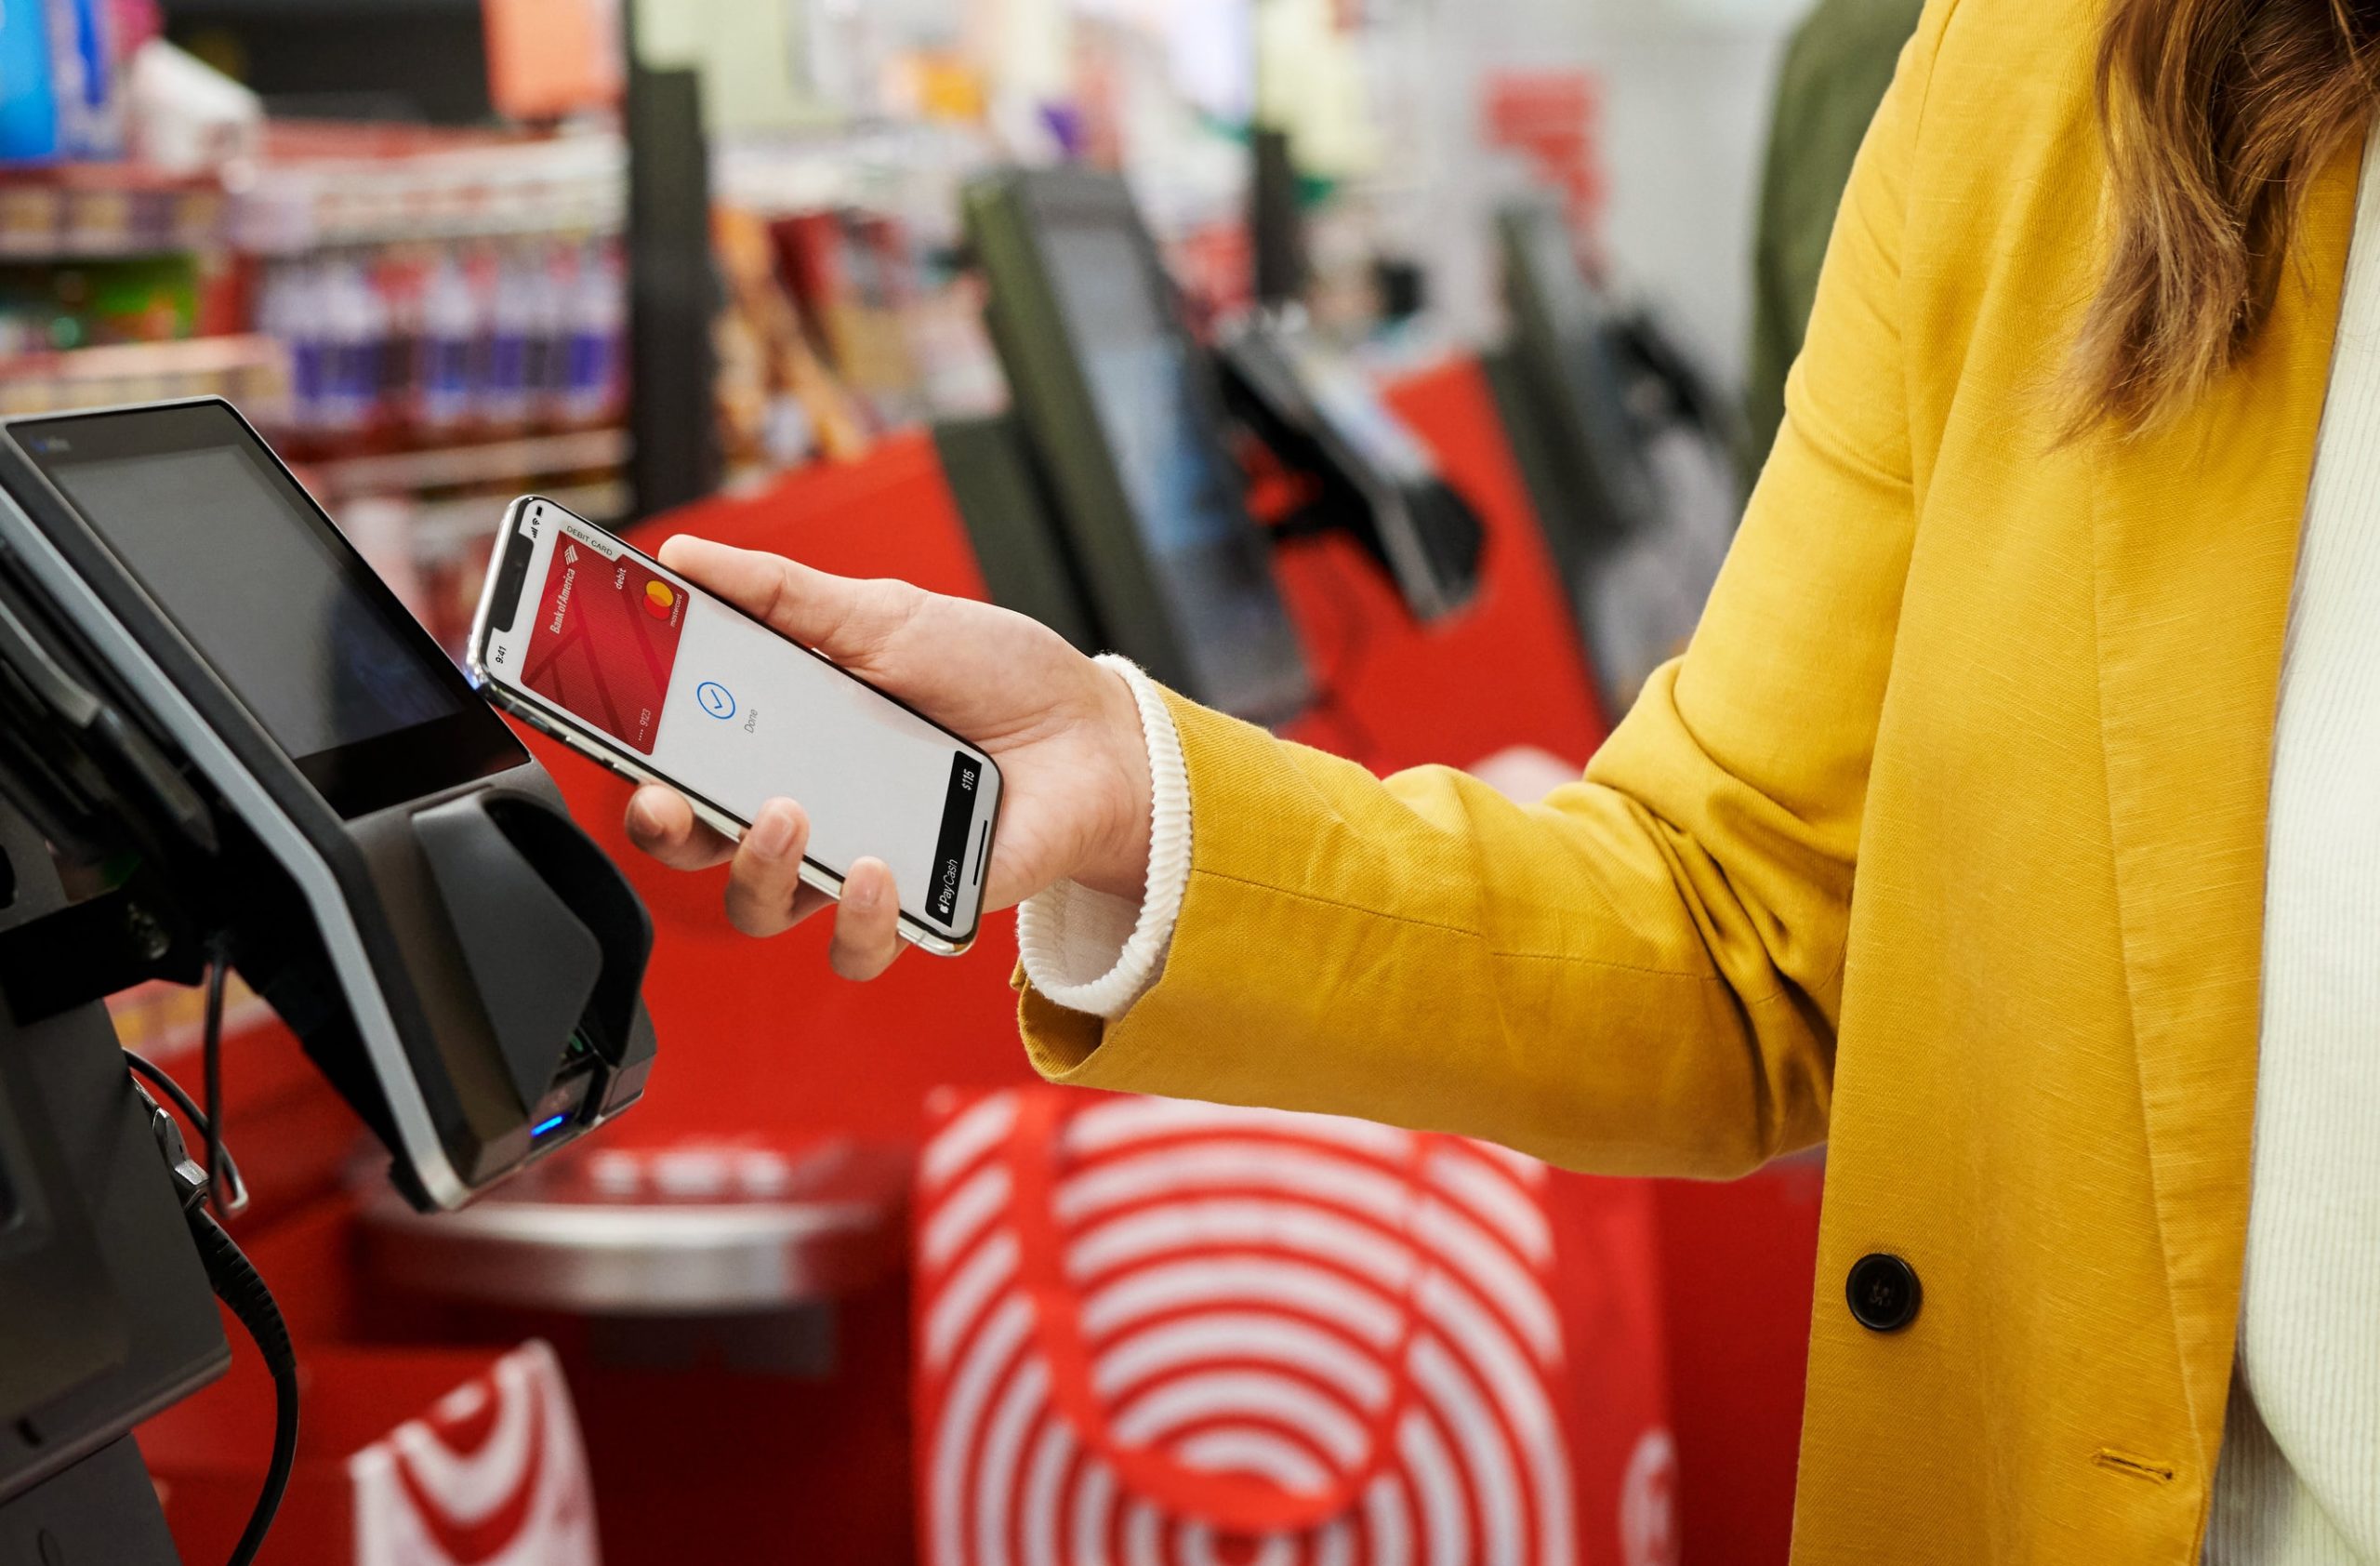 Apple Pay will arrive in Portugal and more countries in Europe soon